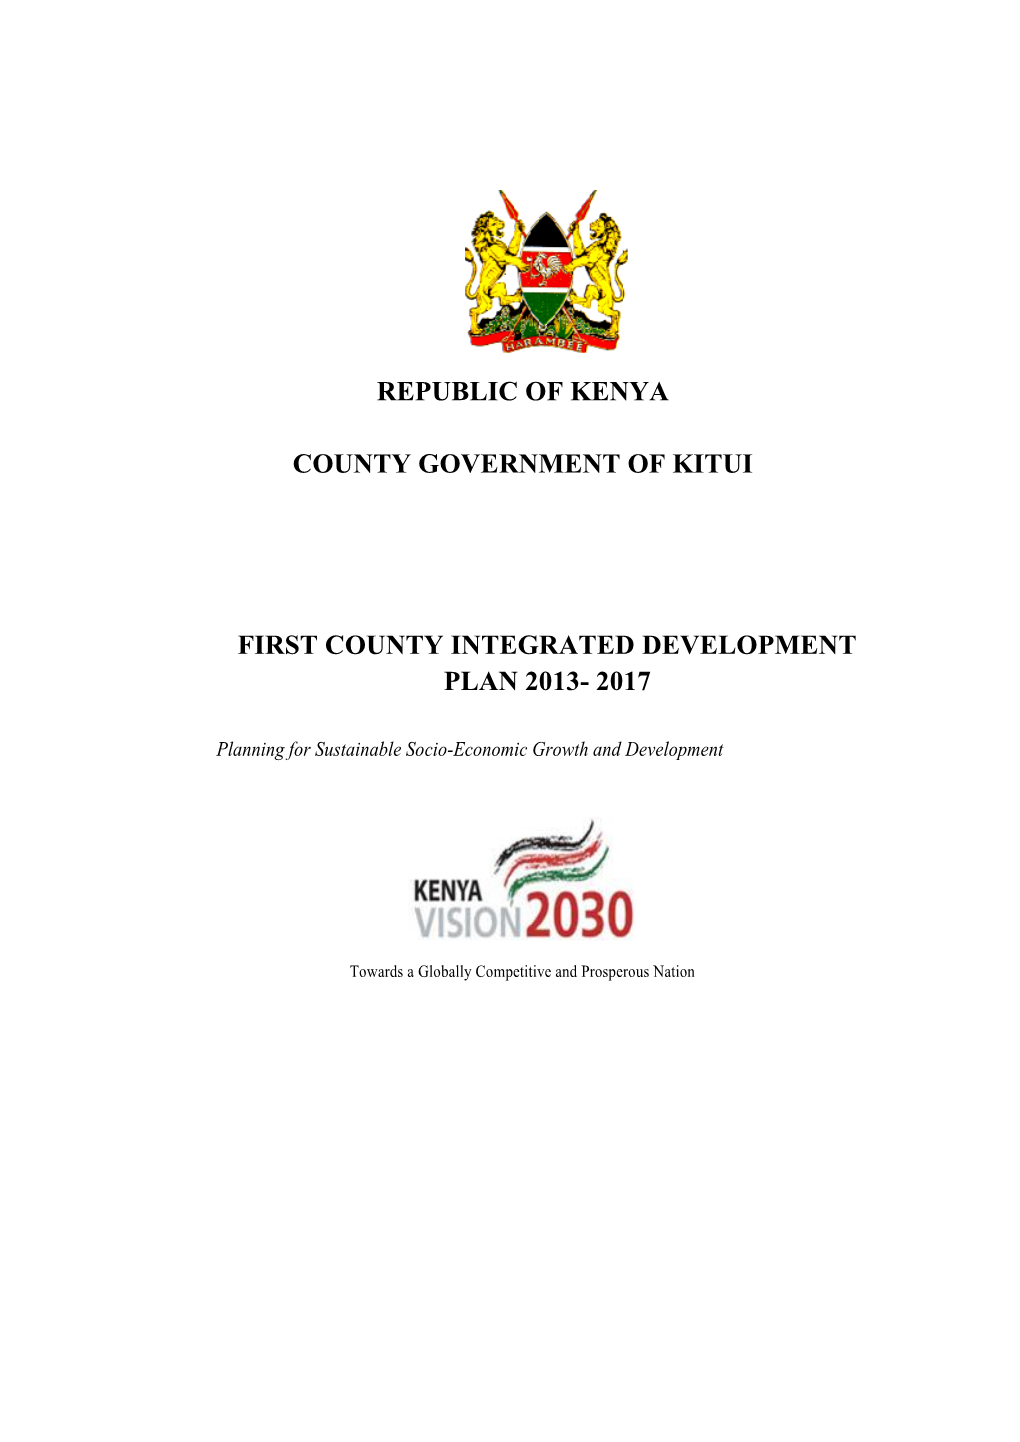 Republic of Kenya County Government of Kitui First County Integrated Development Plan 2013